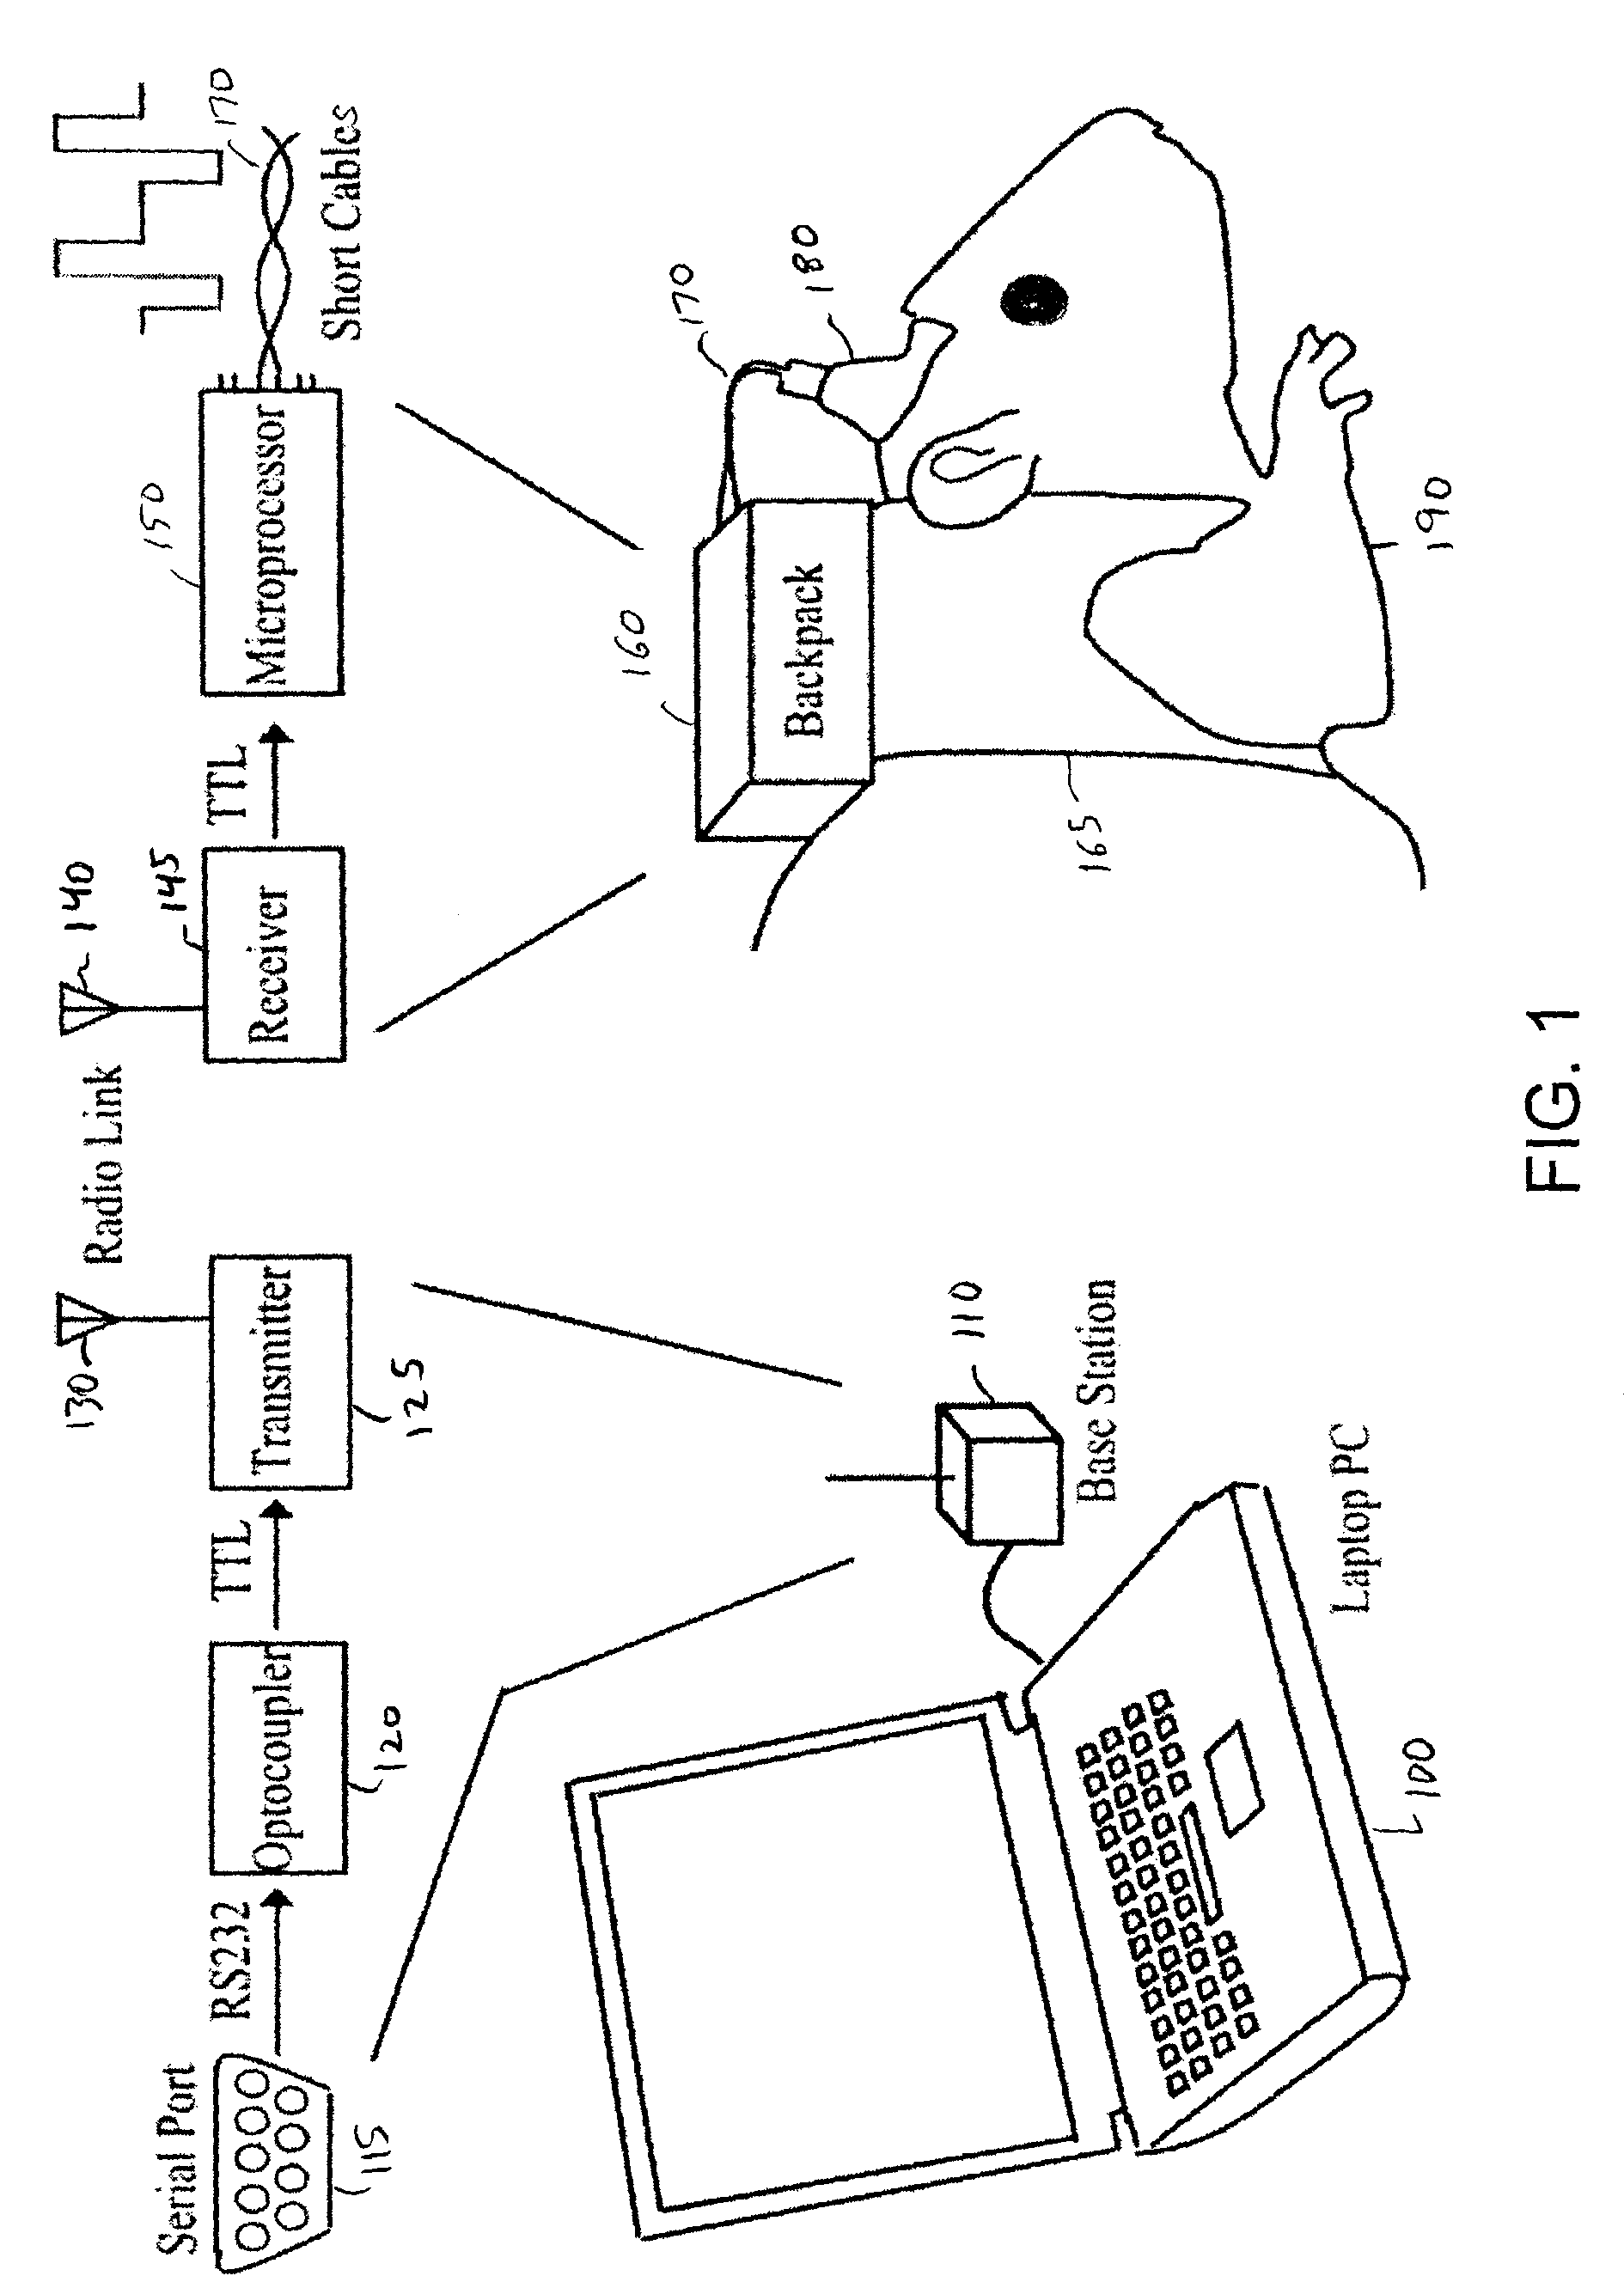 Method and apparatus for guiding movement of a freely roaming animal through brain stimulation